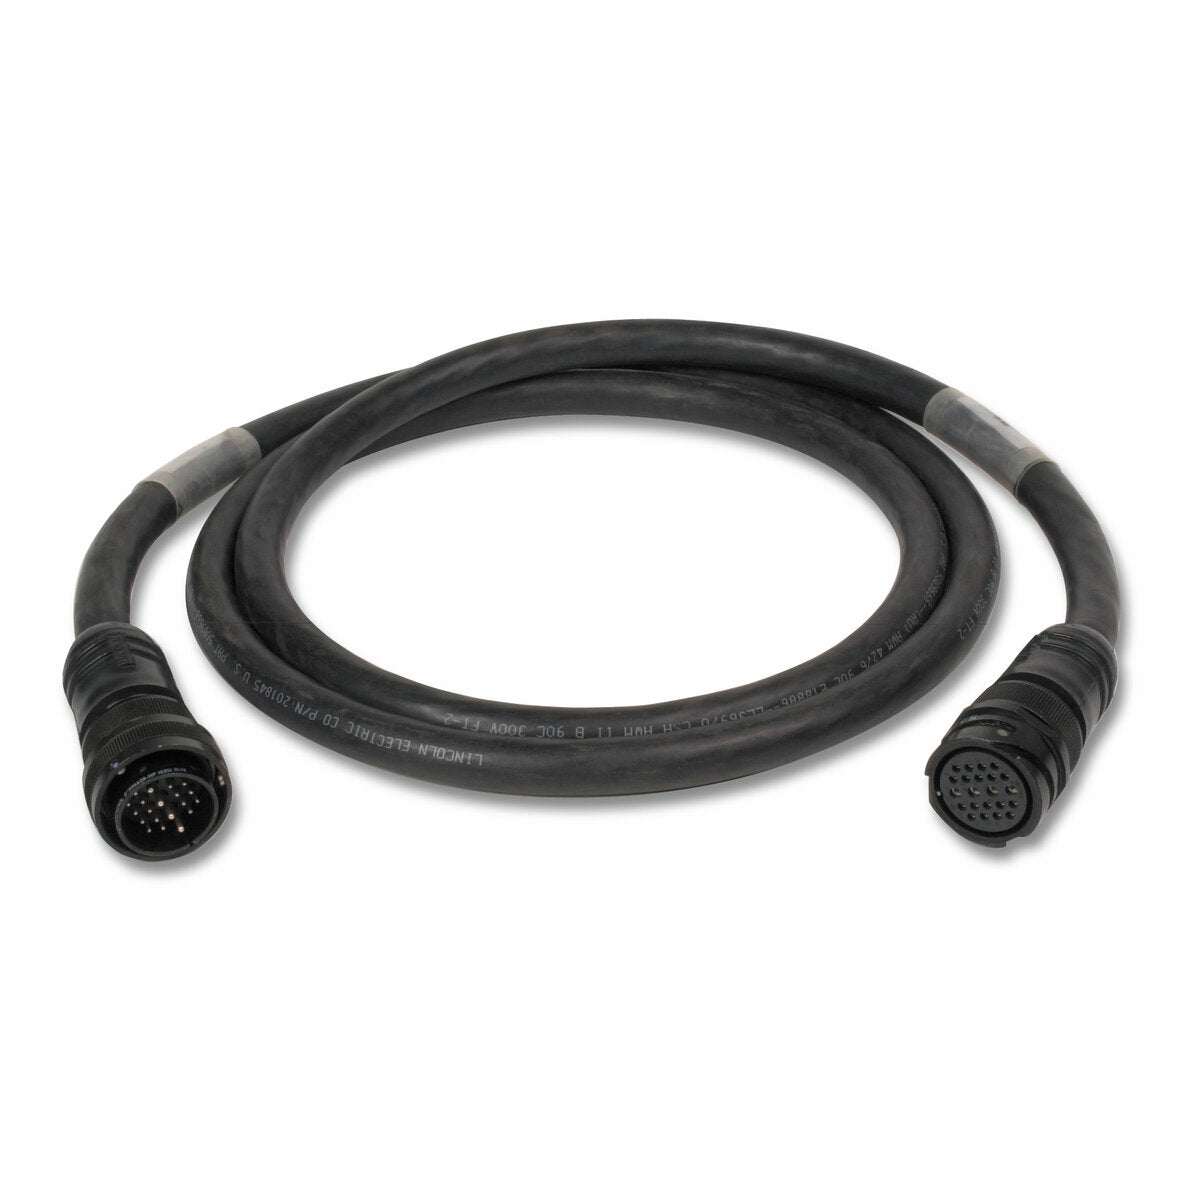 Lincoln Electric - Control Cable - 100 ft (30.5 m) - K1795-100